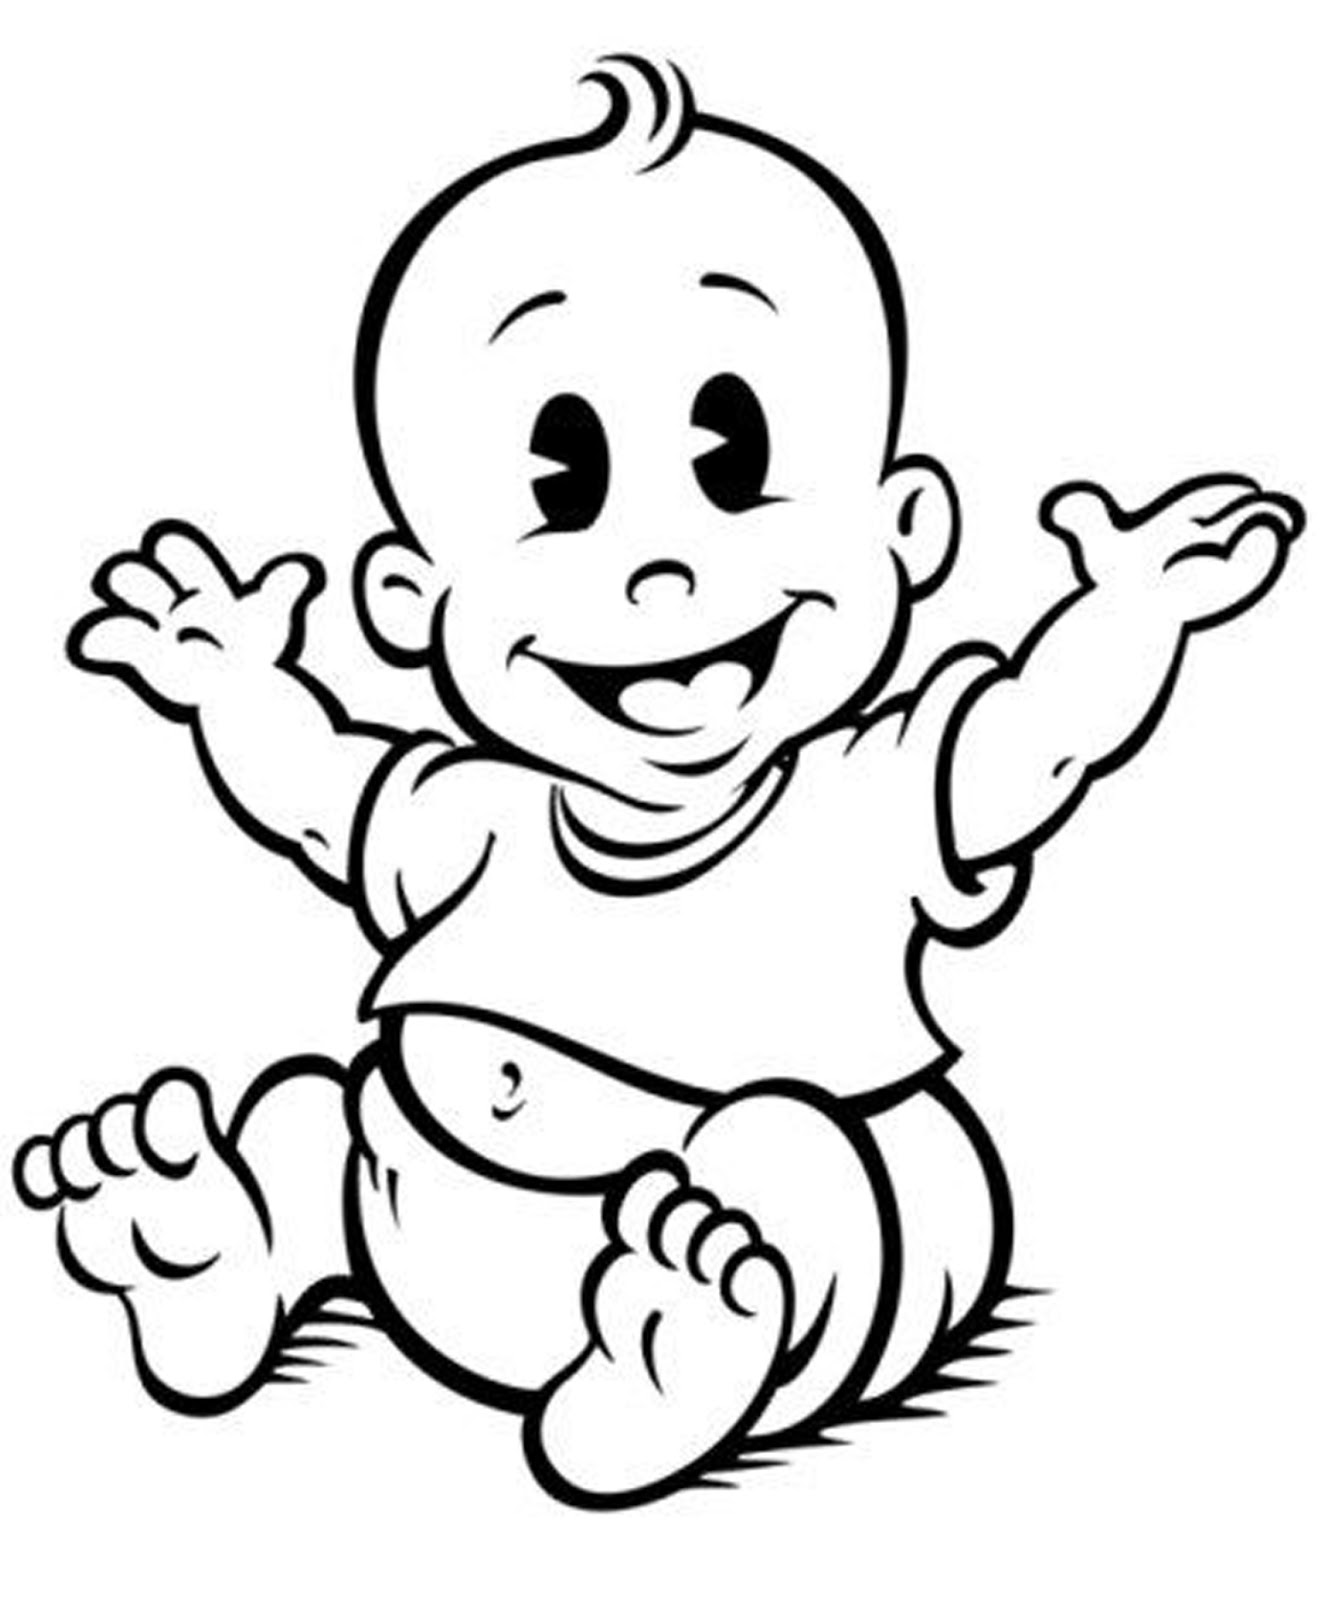 Its shower clip art. Baby clipart line drawing